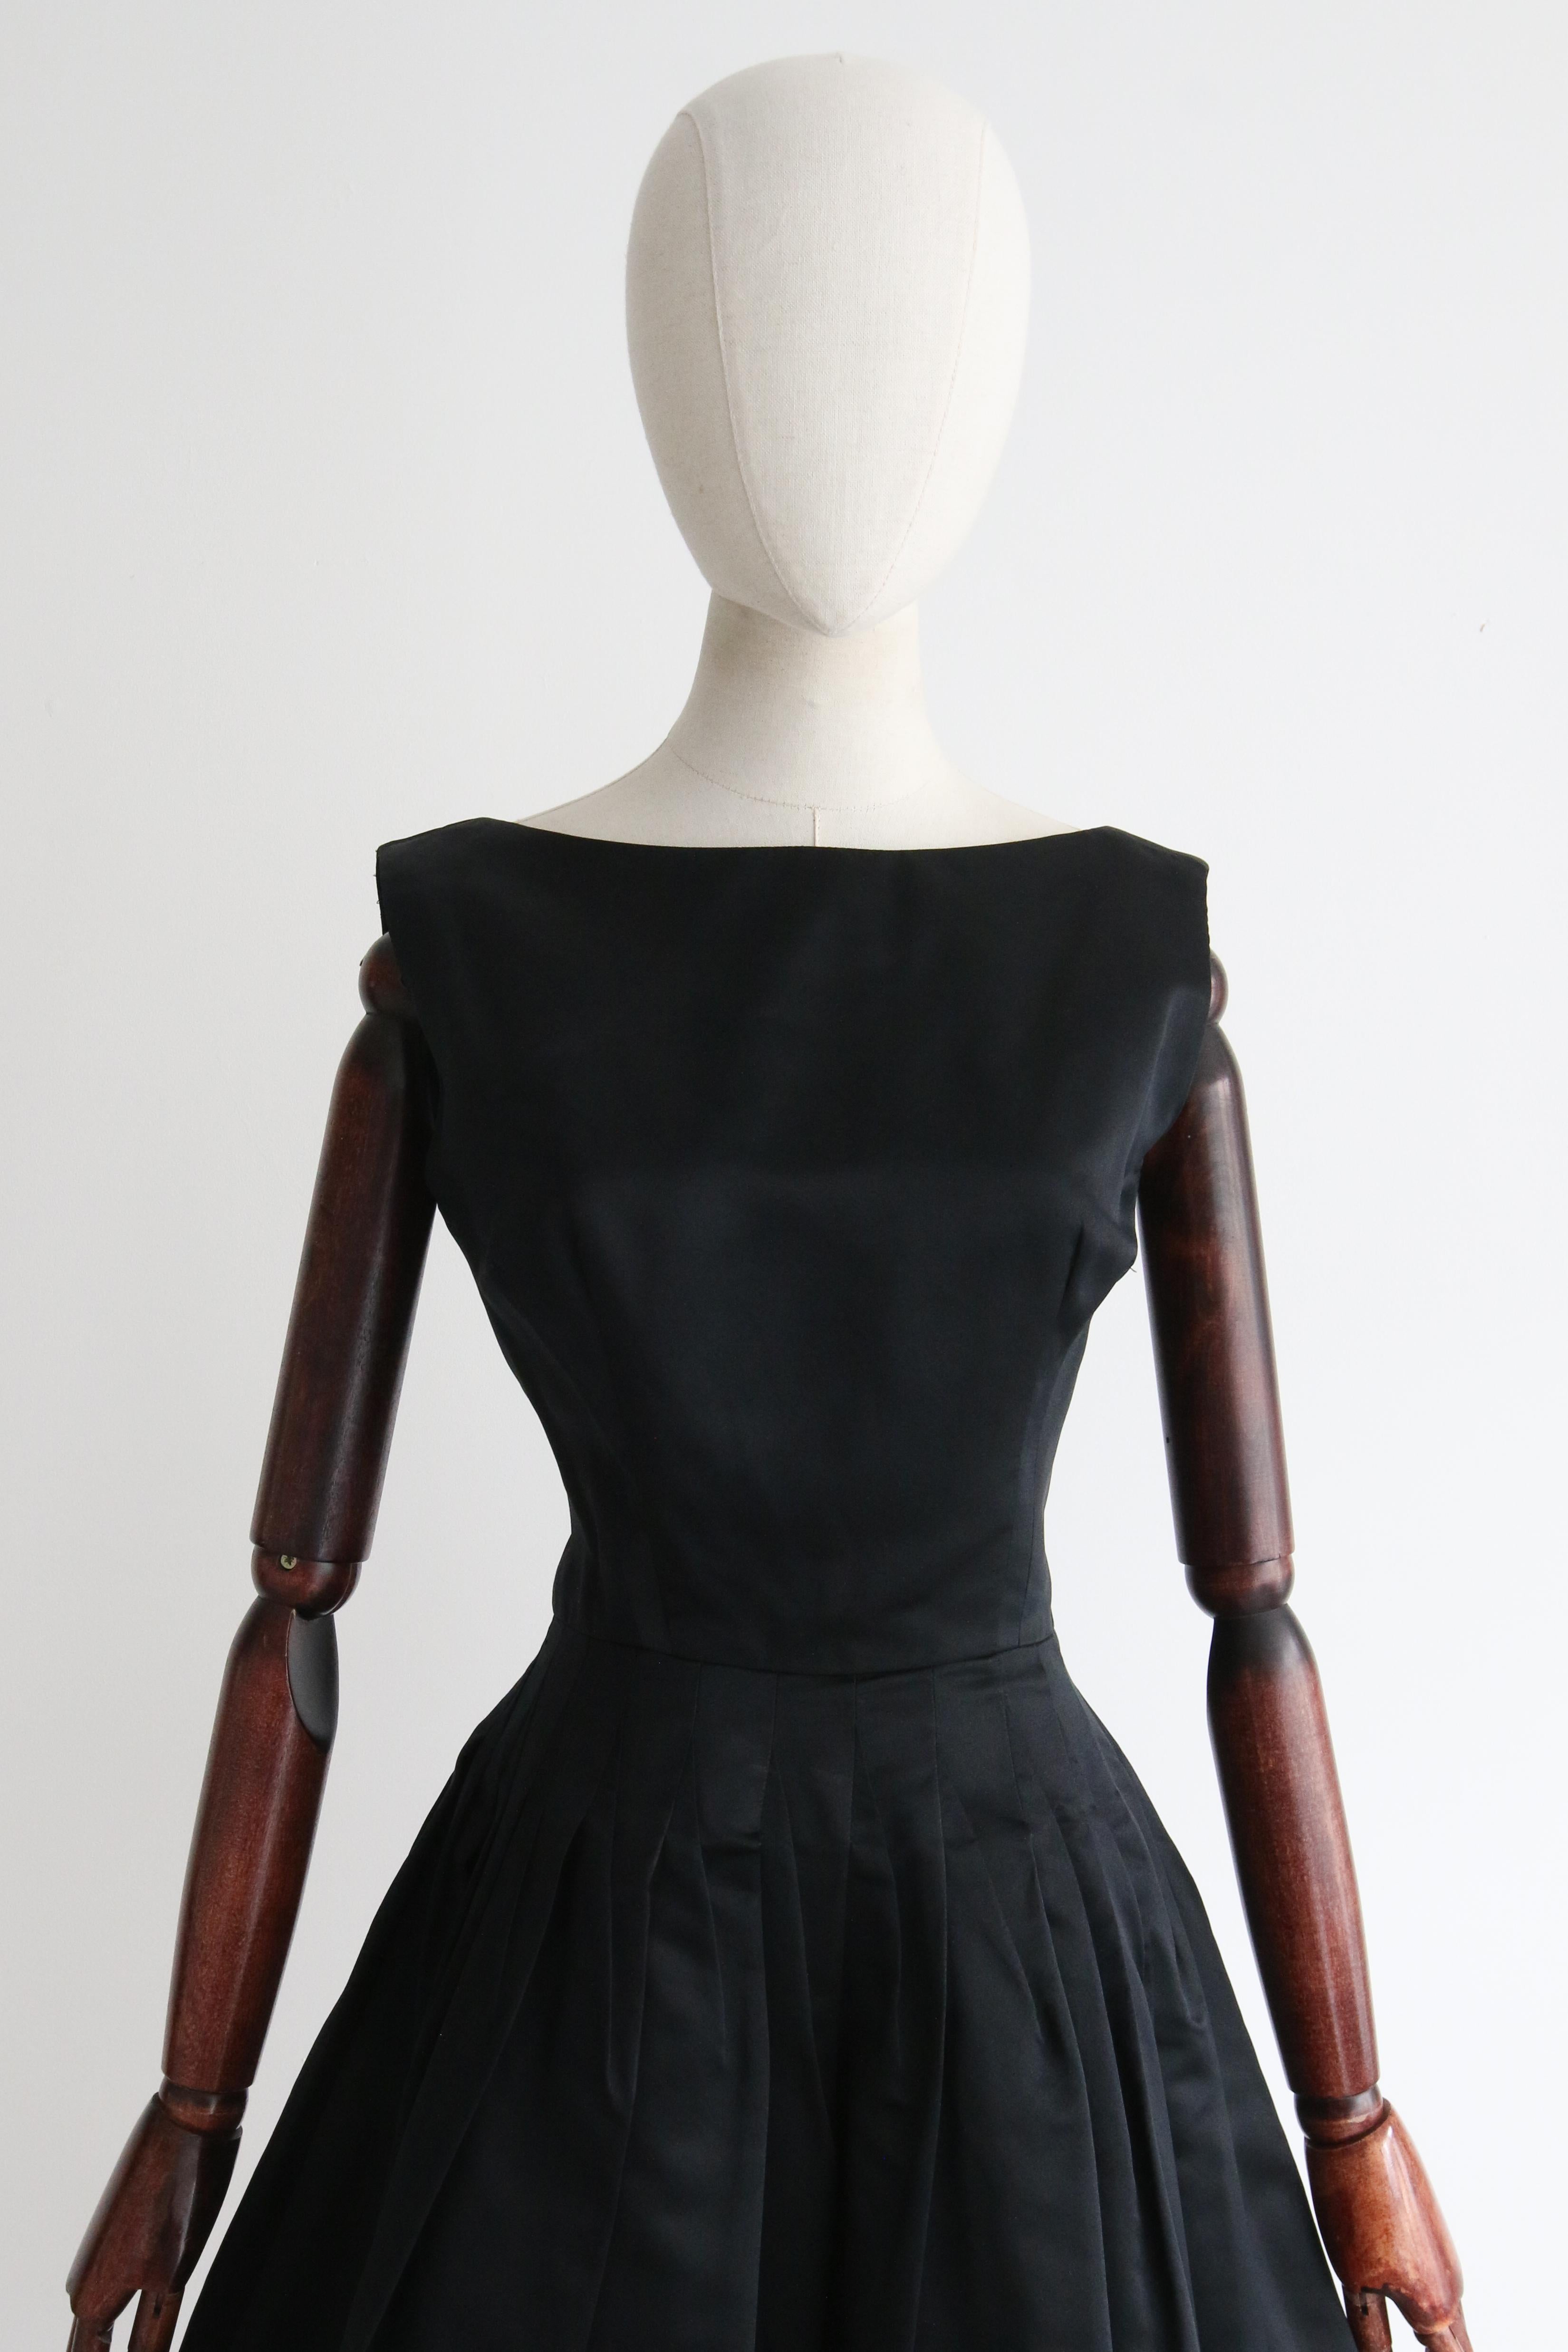 This truly mesmerising 1950's couture dress, rendered in a sumptuous black satin and accented by angular pointed seams, is just the piece to add to your timeless capsule collection.

The bateau neckline of the dress is framed my medium shoulder